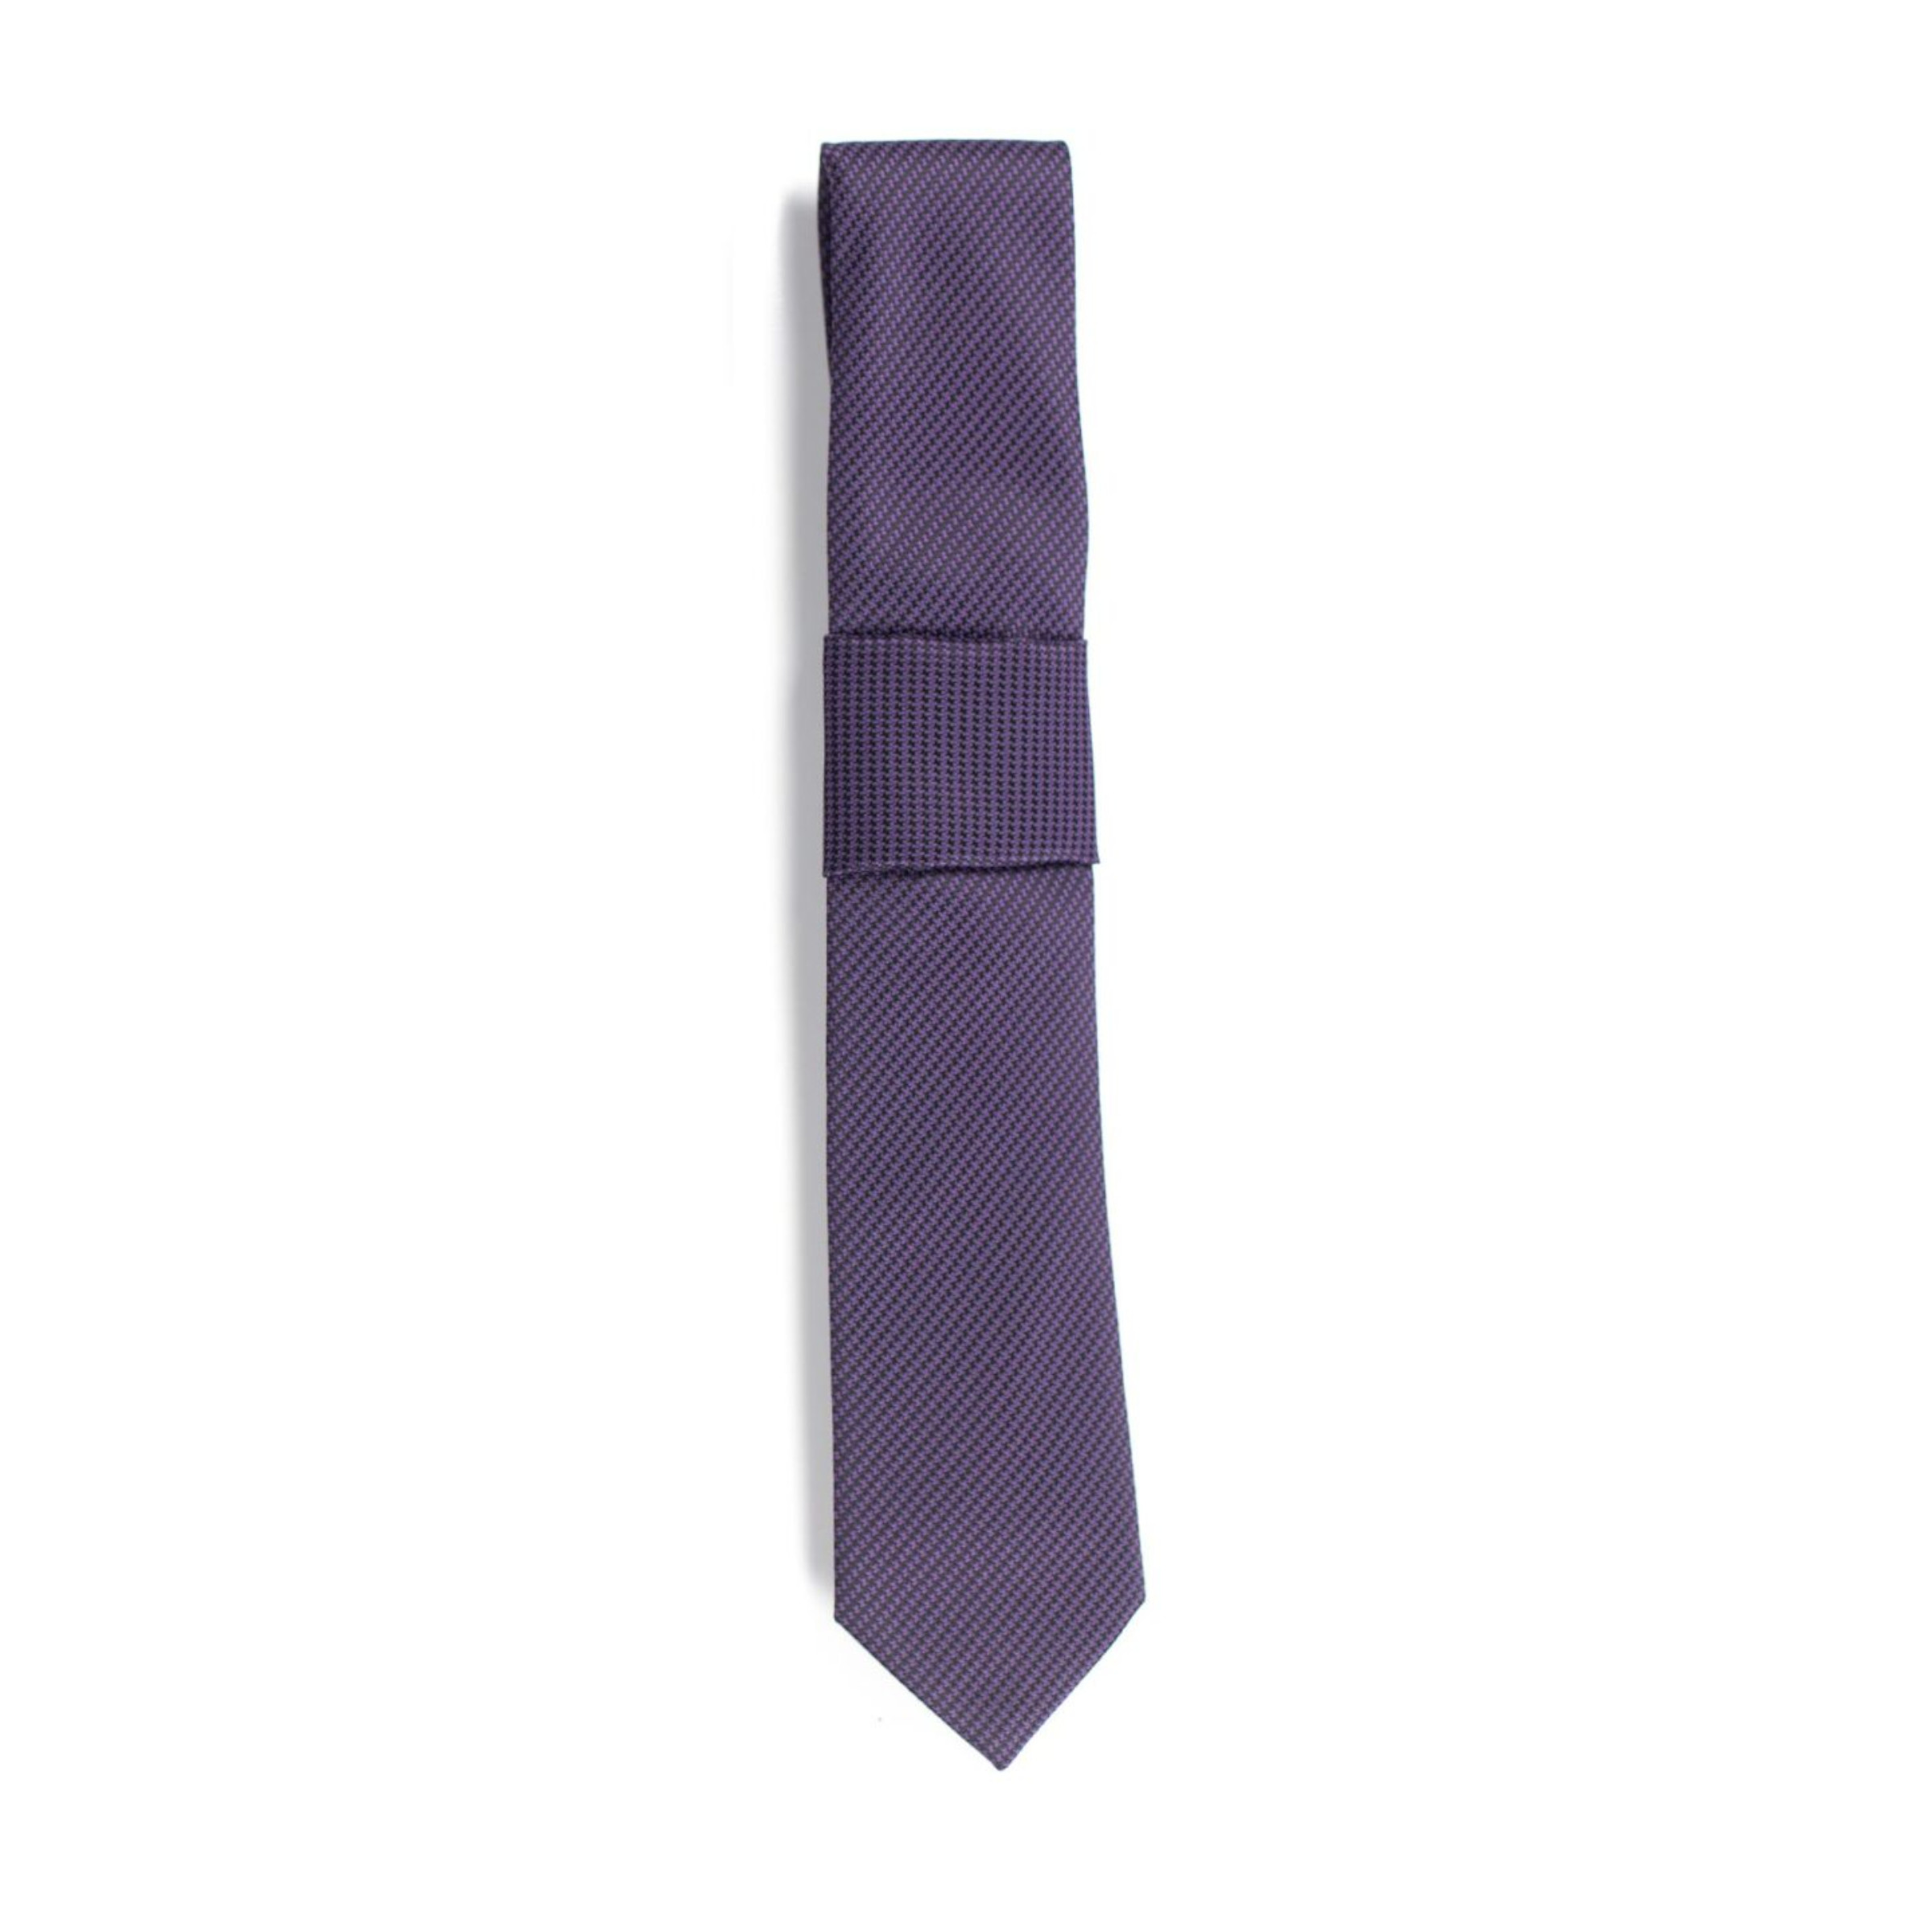 A purple houndstooth patterned tie on a white background